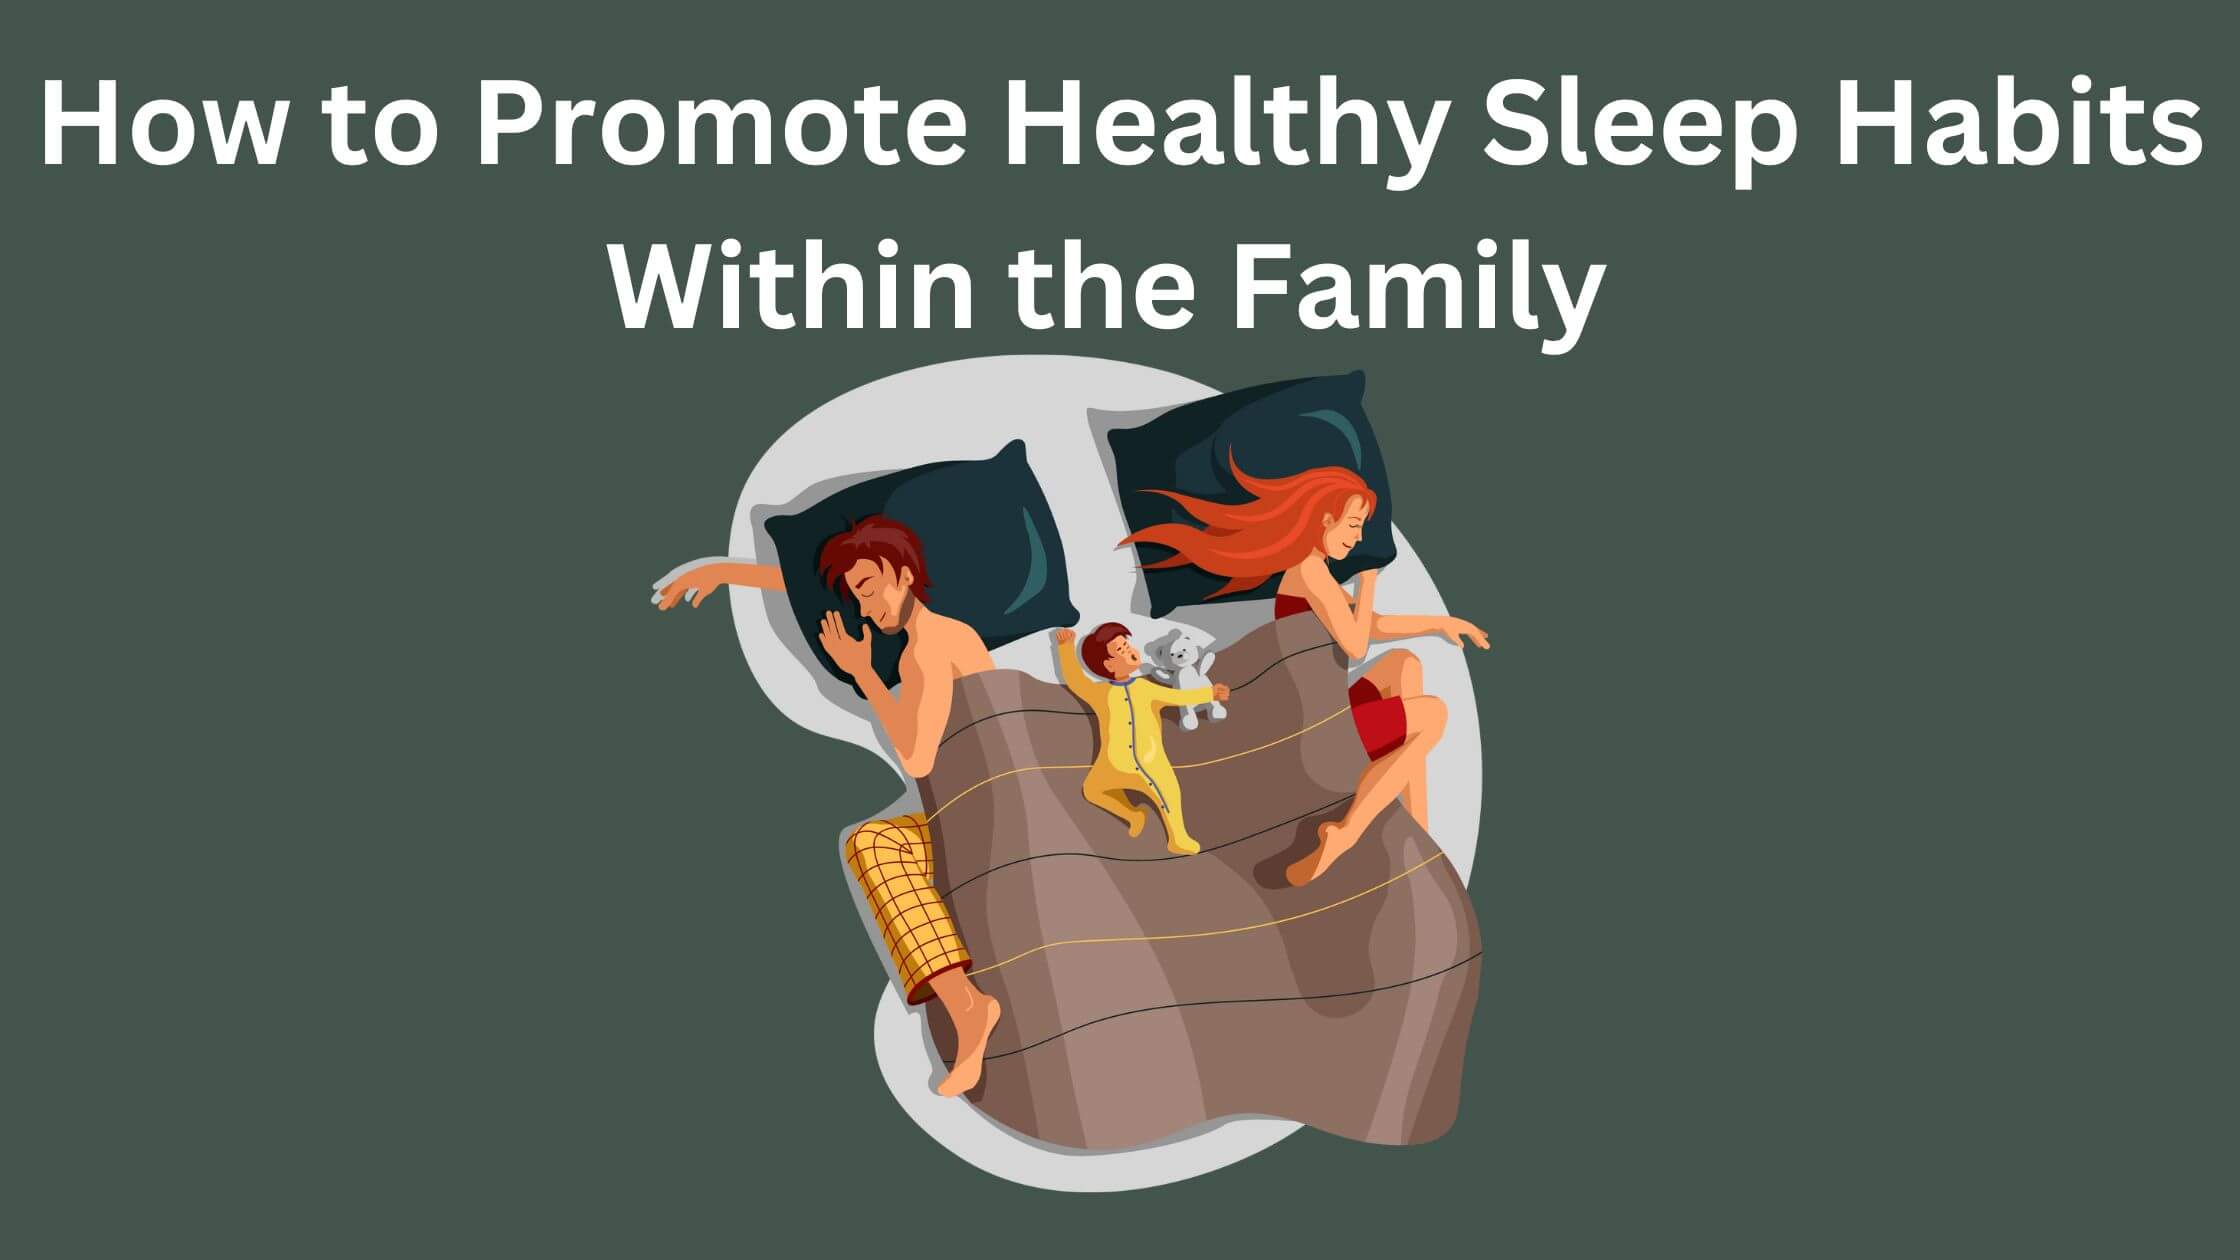 How to promote healthy sleep habits within the family